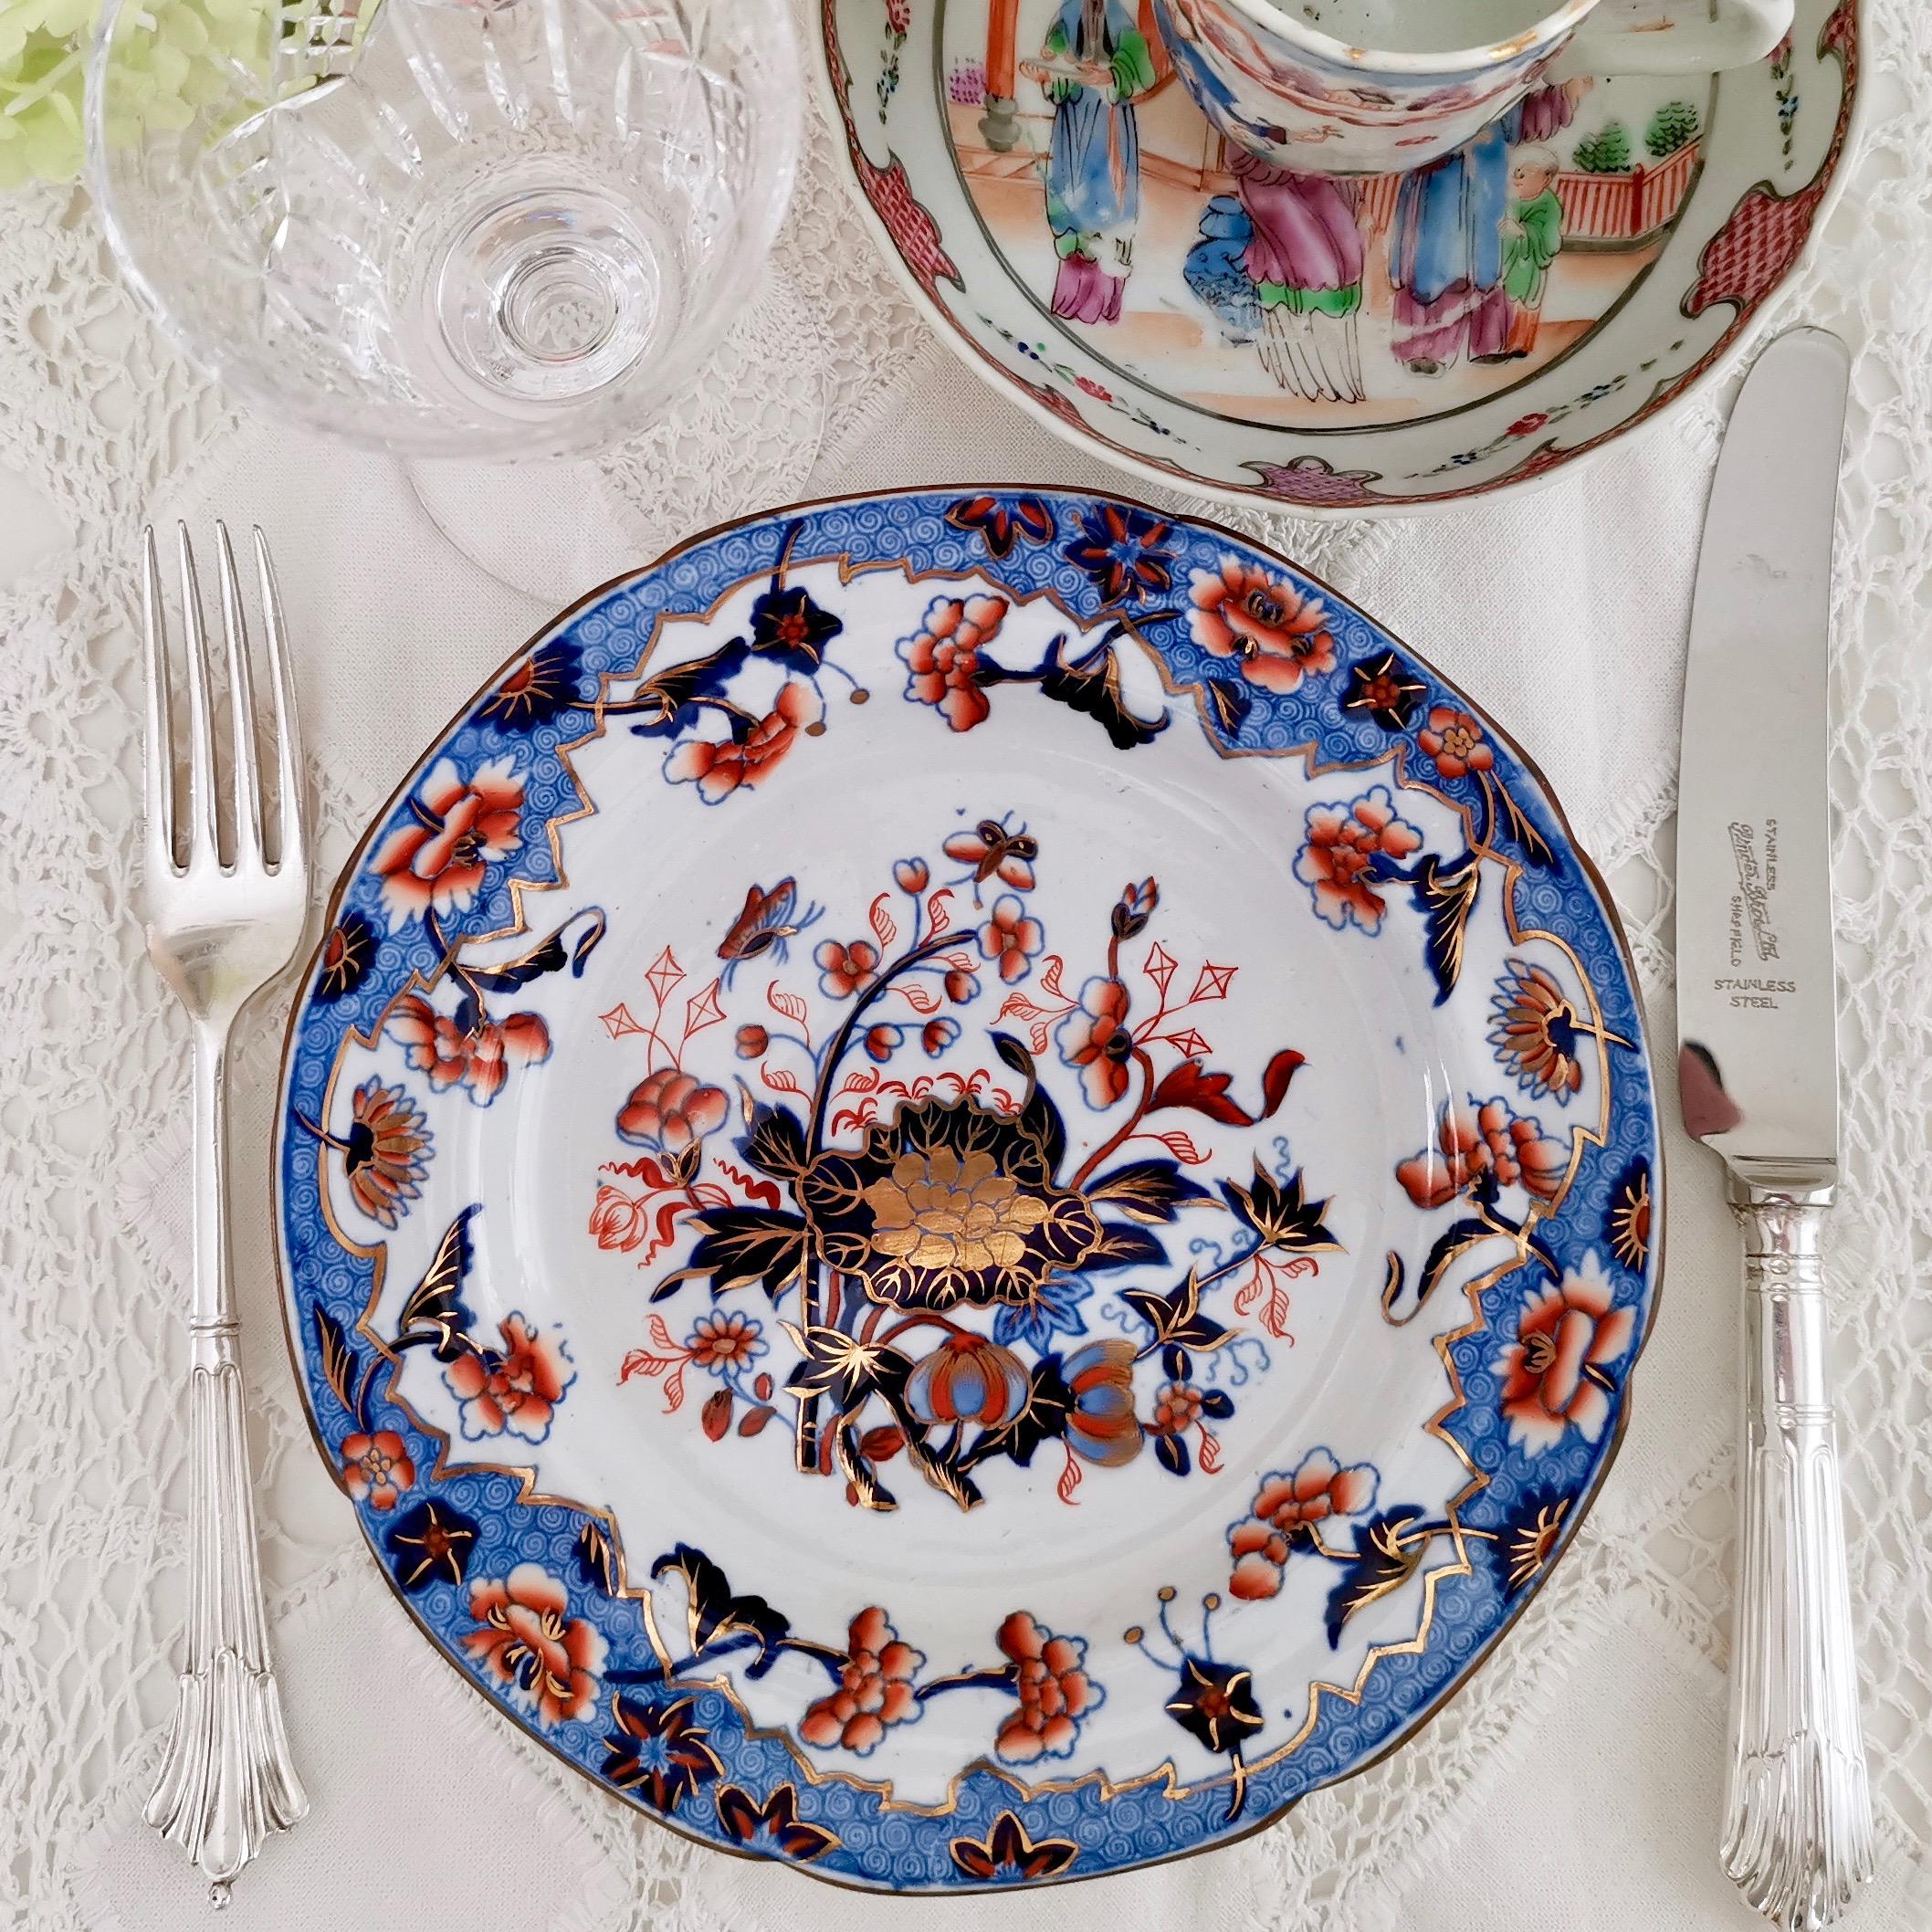 This is a beautiful little Spode plate made between 1822 and 1833. The plate is made of 